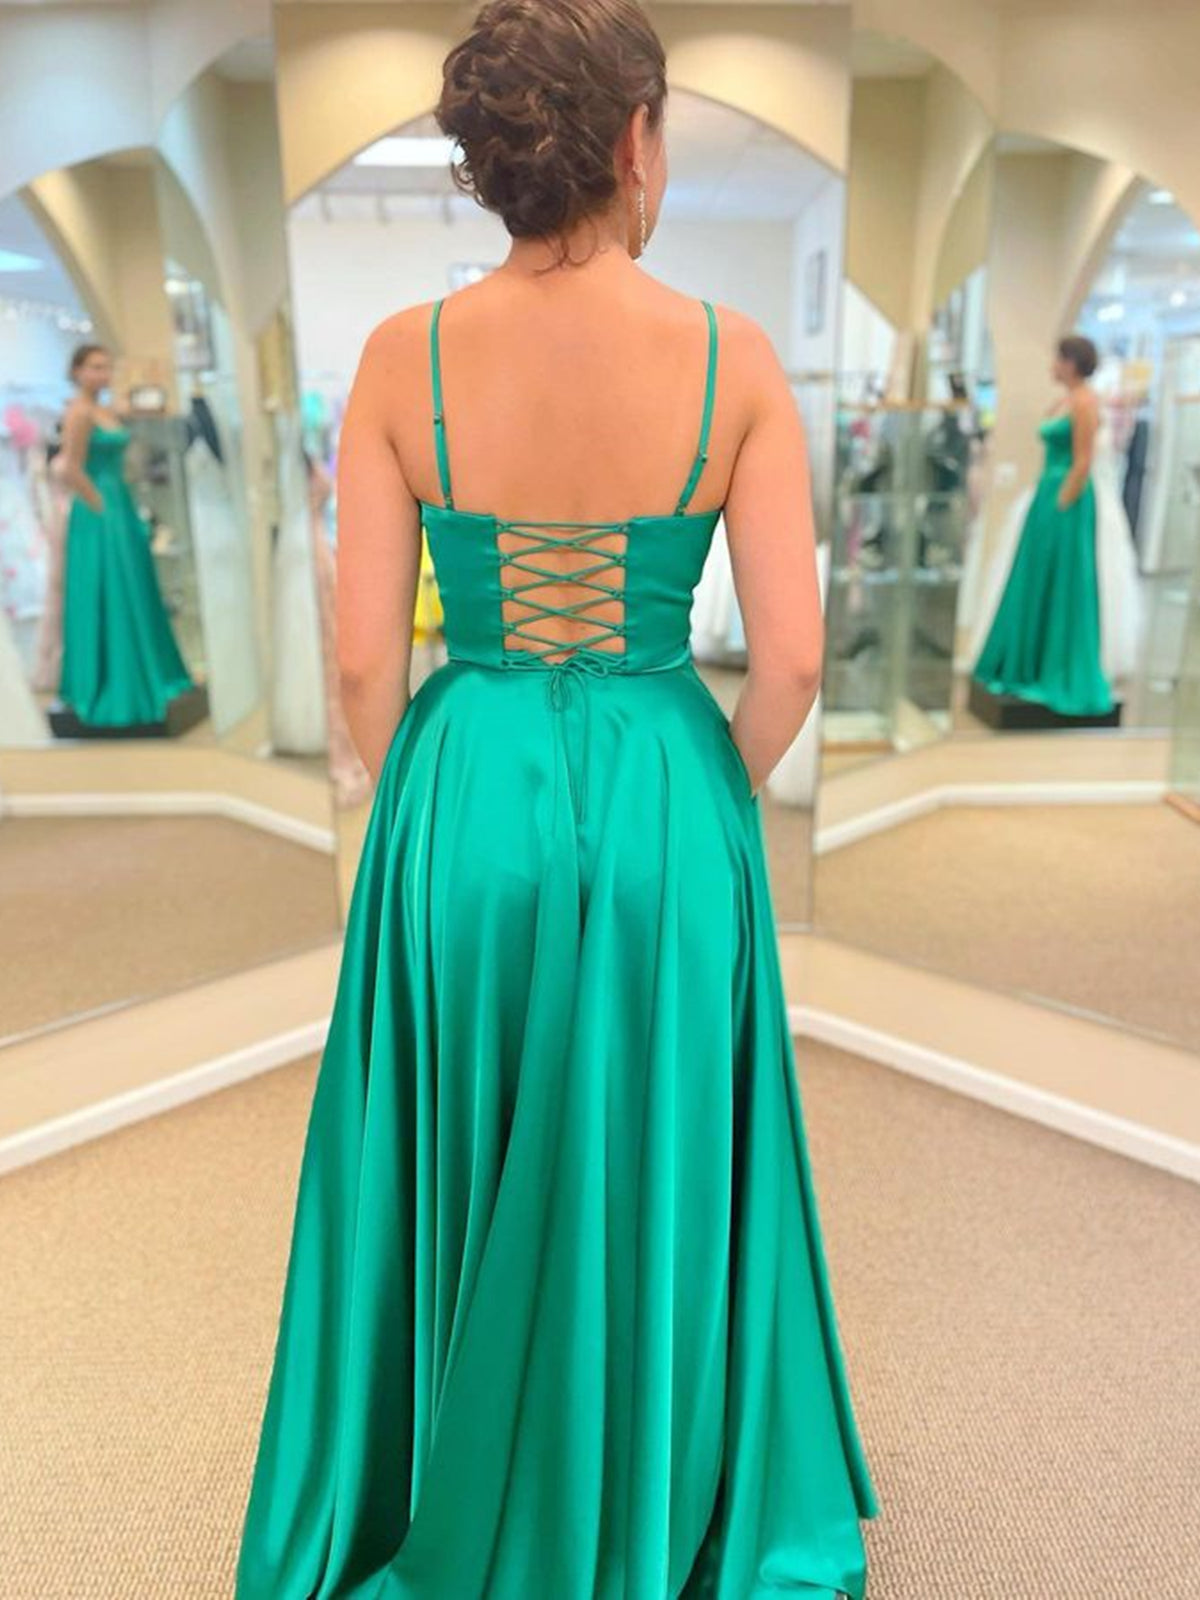 Long A-line Satin Prom Dress with Pockets Green Formal Graduation Evening Dresses with Slit-BIZTUNNEL